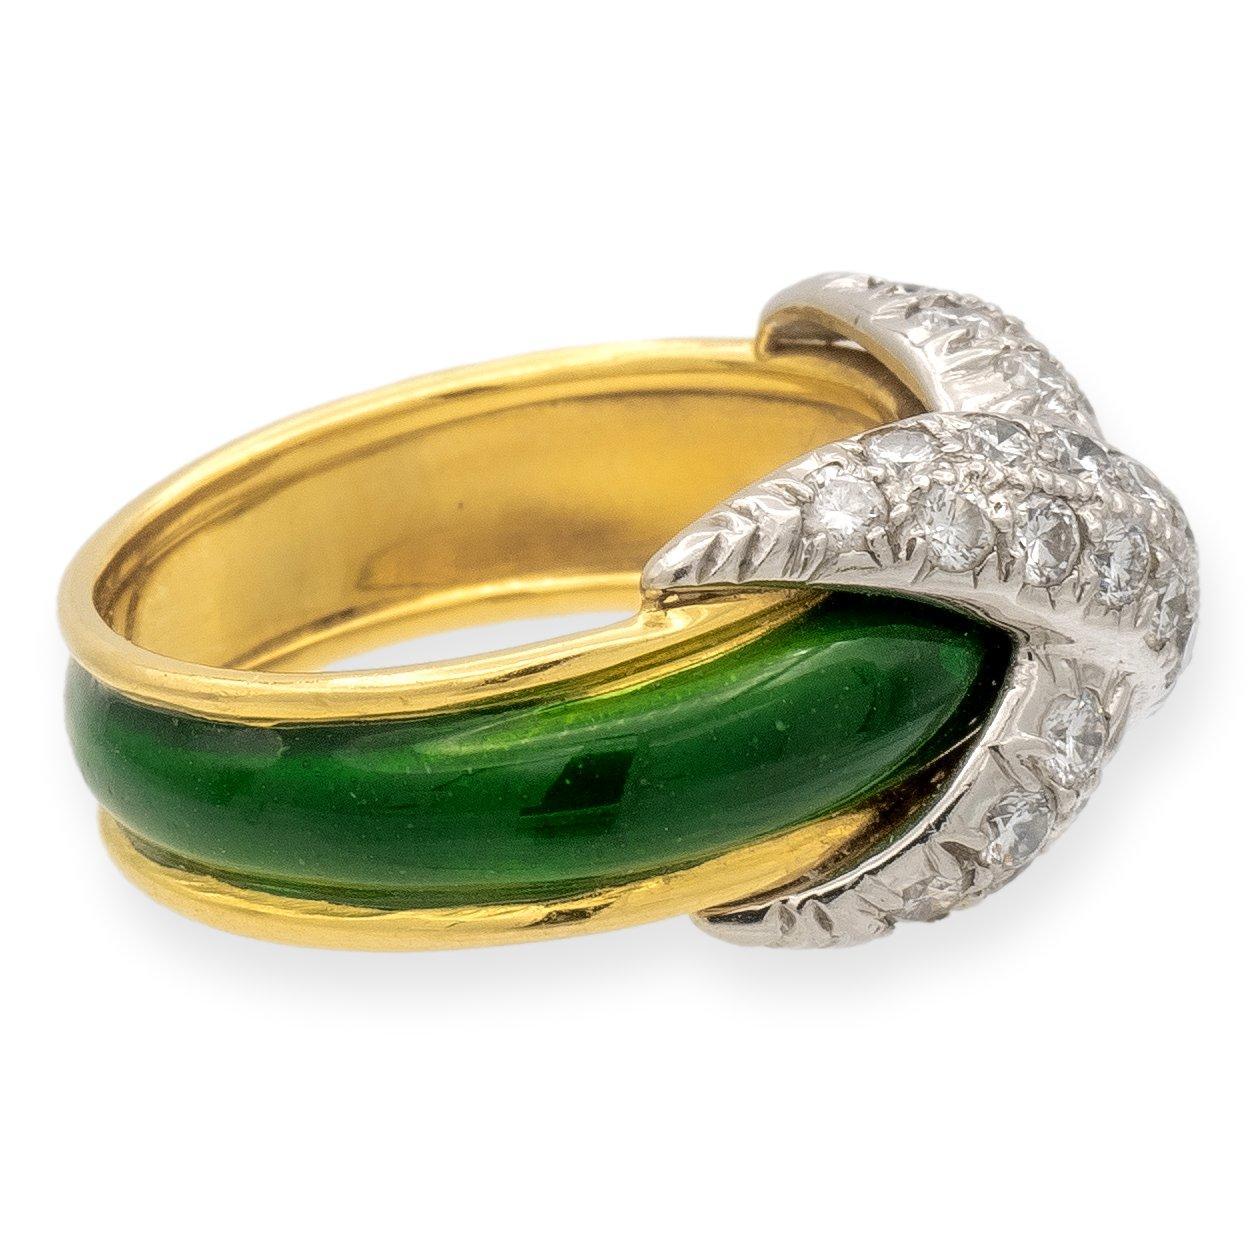 Tiffany & Co. Schlumberger Collection ring, finely crafted in 18-karat yellow gold in a tapered design, adorned with vivid green enamel, culminating in an X motif center in platinum. The platinum setting is embellished with round brilliant cut